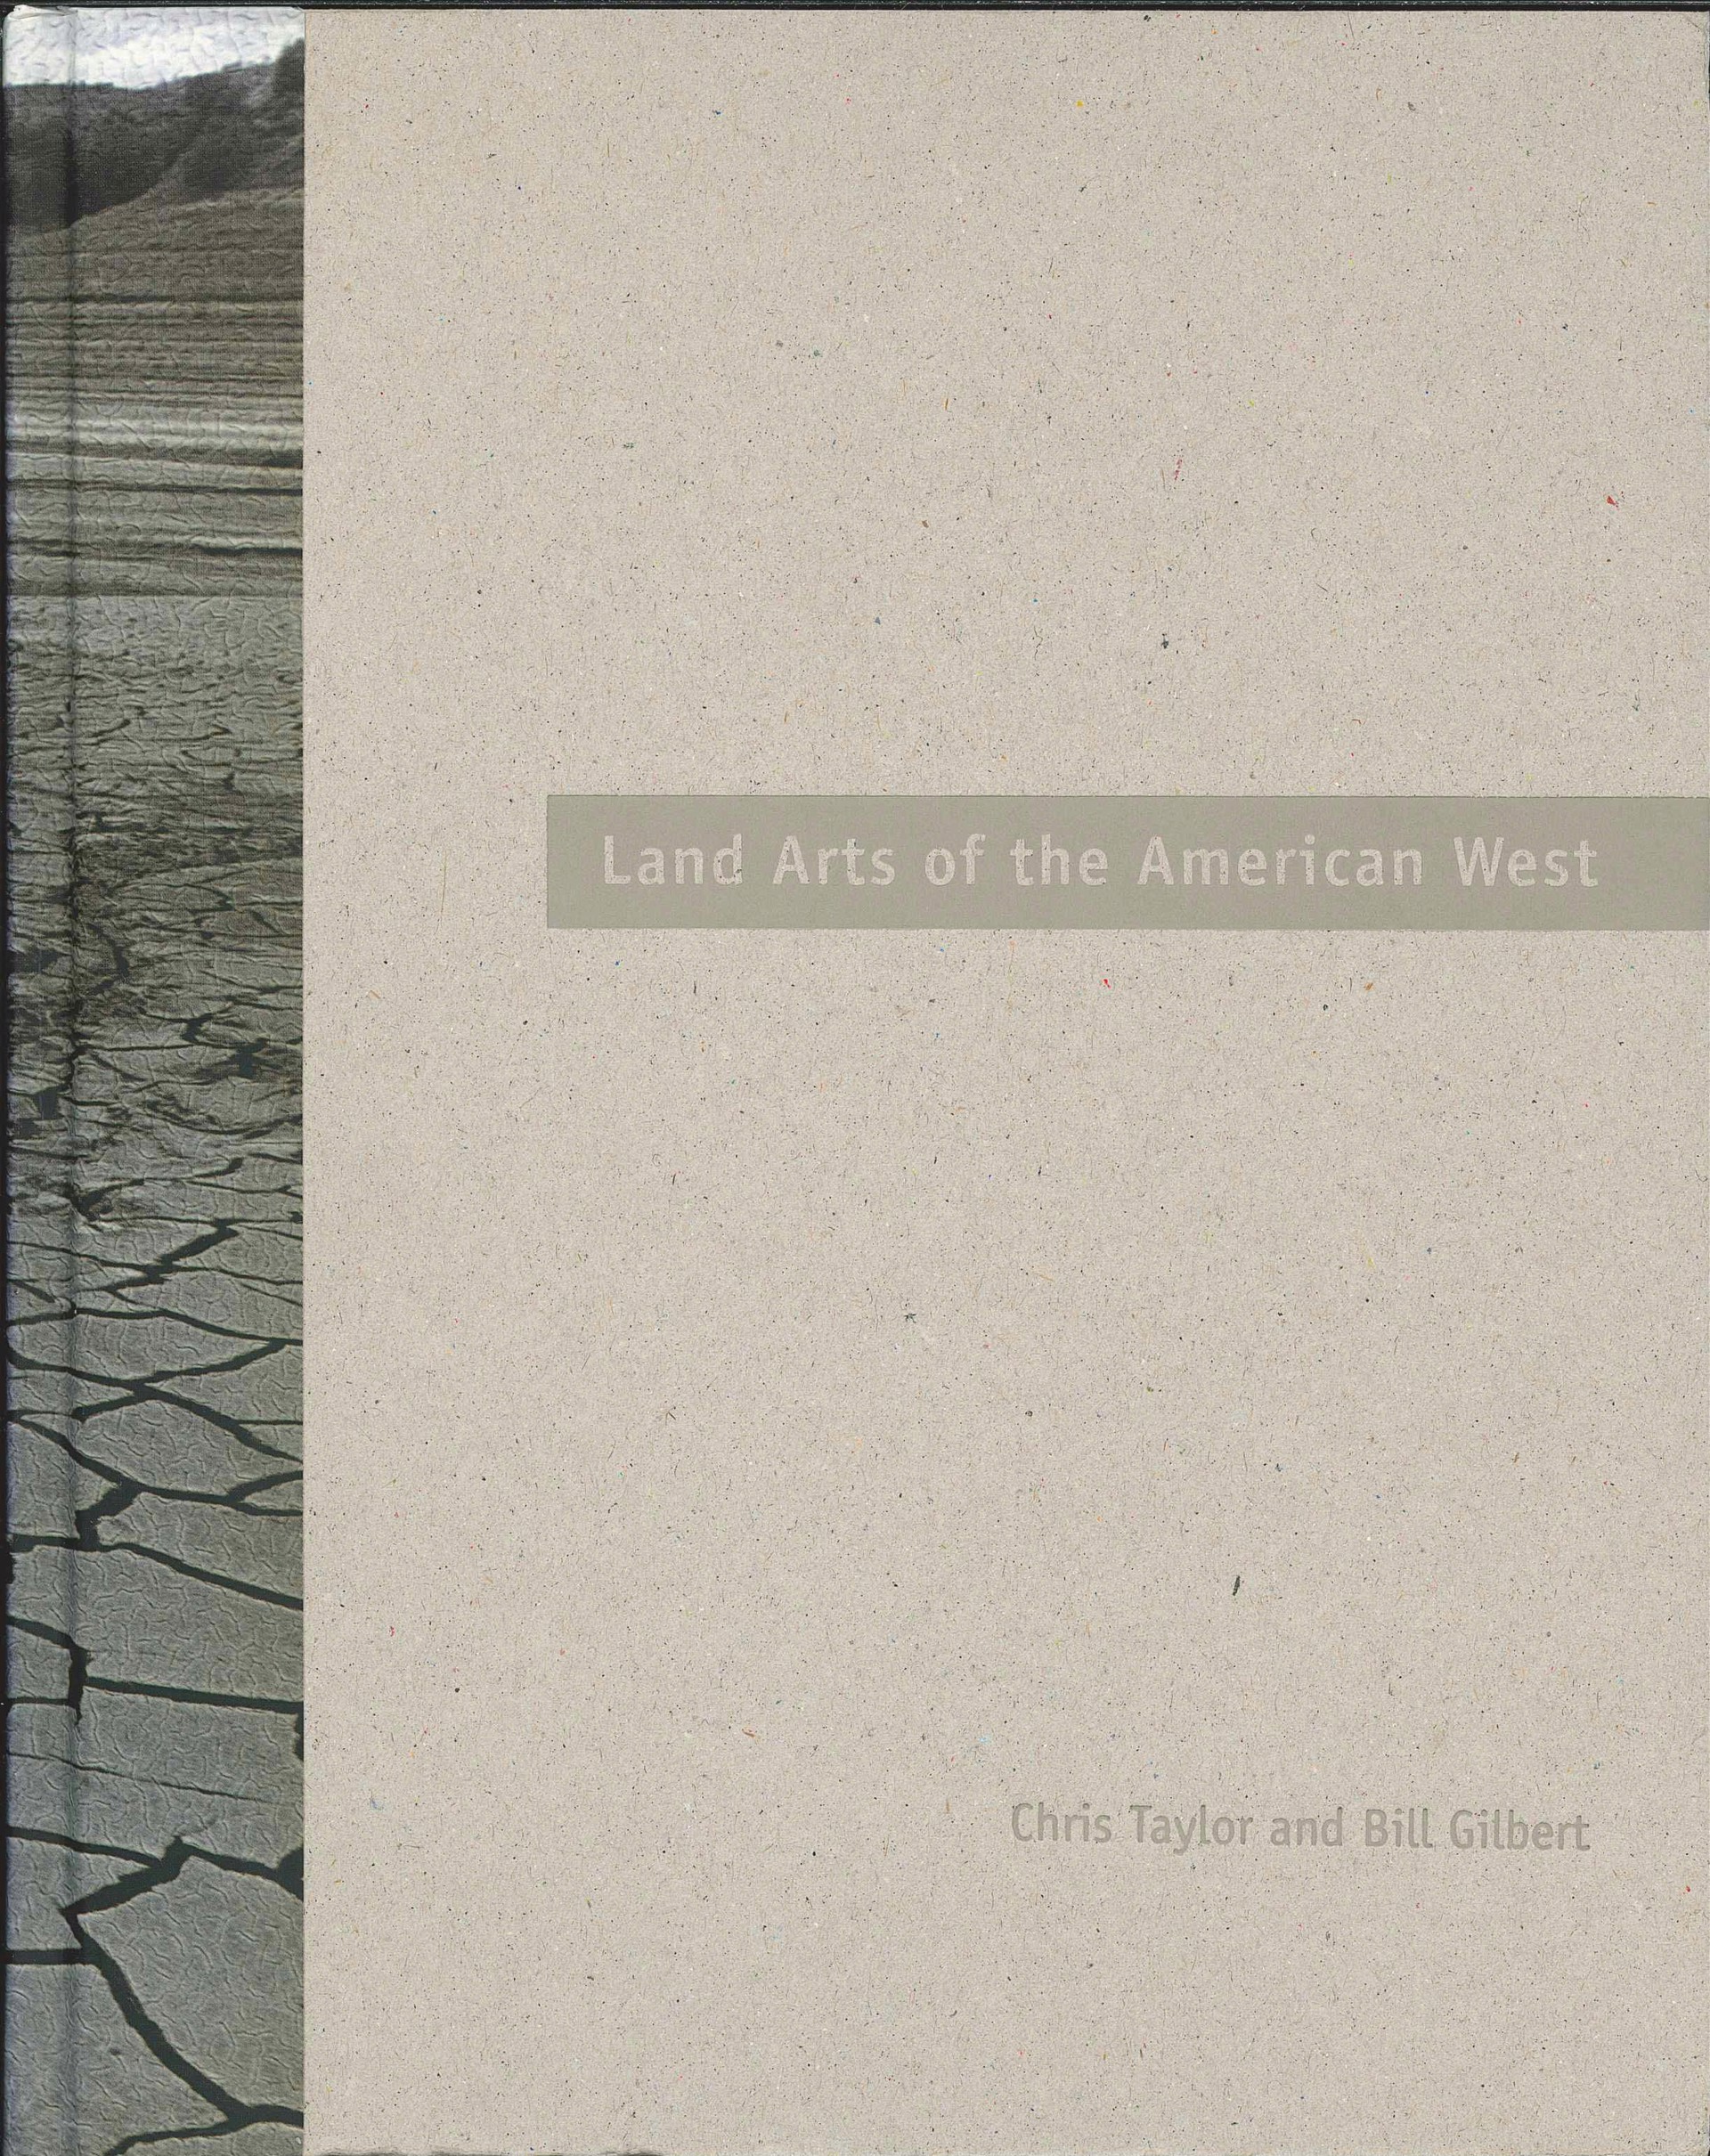 Land Arts of the American West by Chris Taylor and Bill Gilbert by Publications